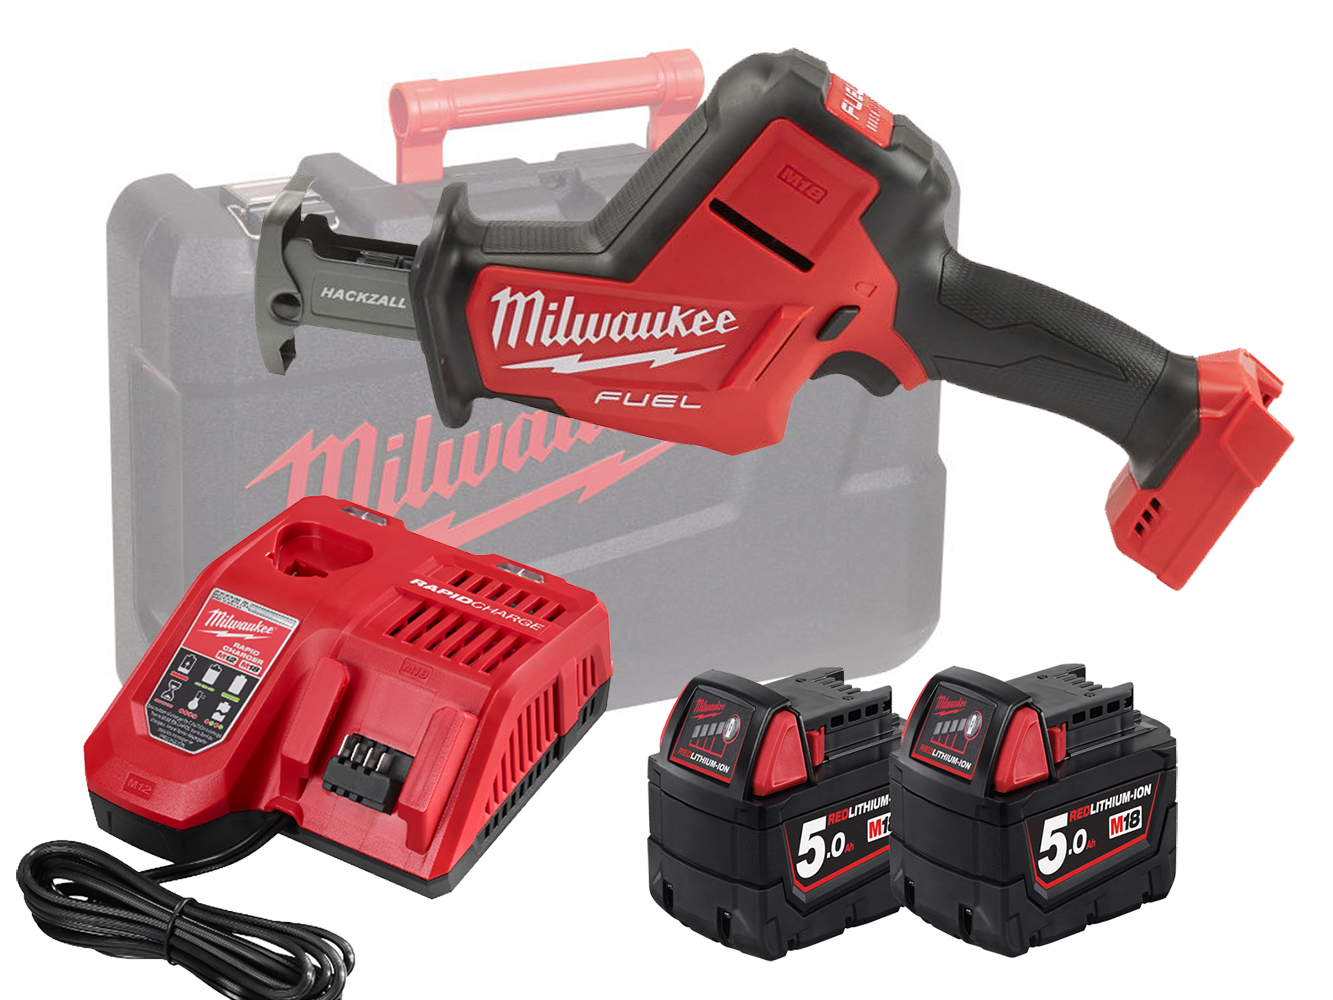 Milwaukee M18FHZ 18V Fuel Brushless Hackzall (Reciprocating Saw) - 5.0Ah Pack